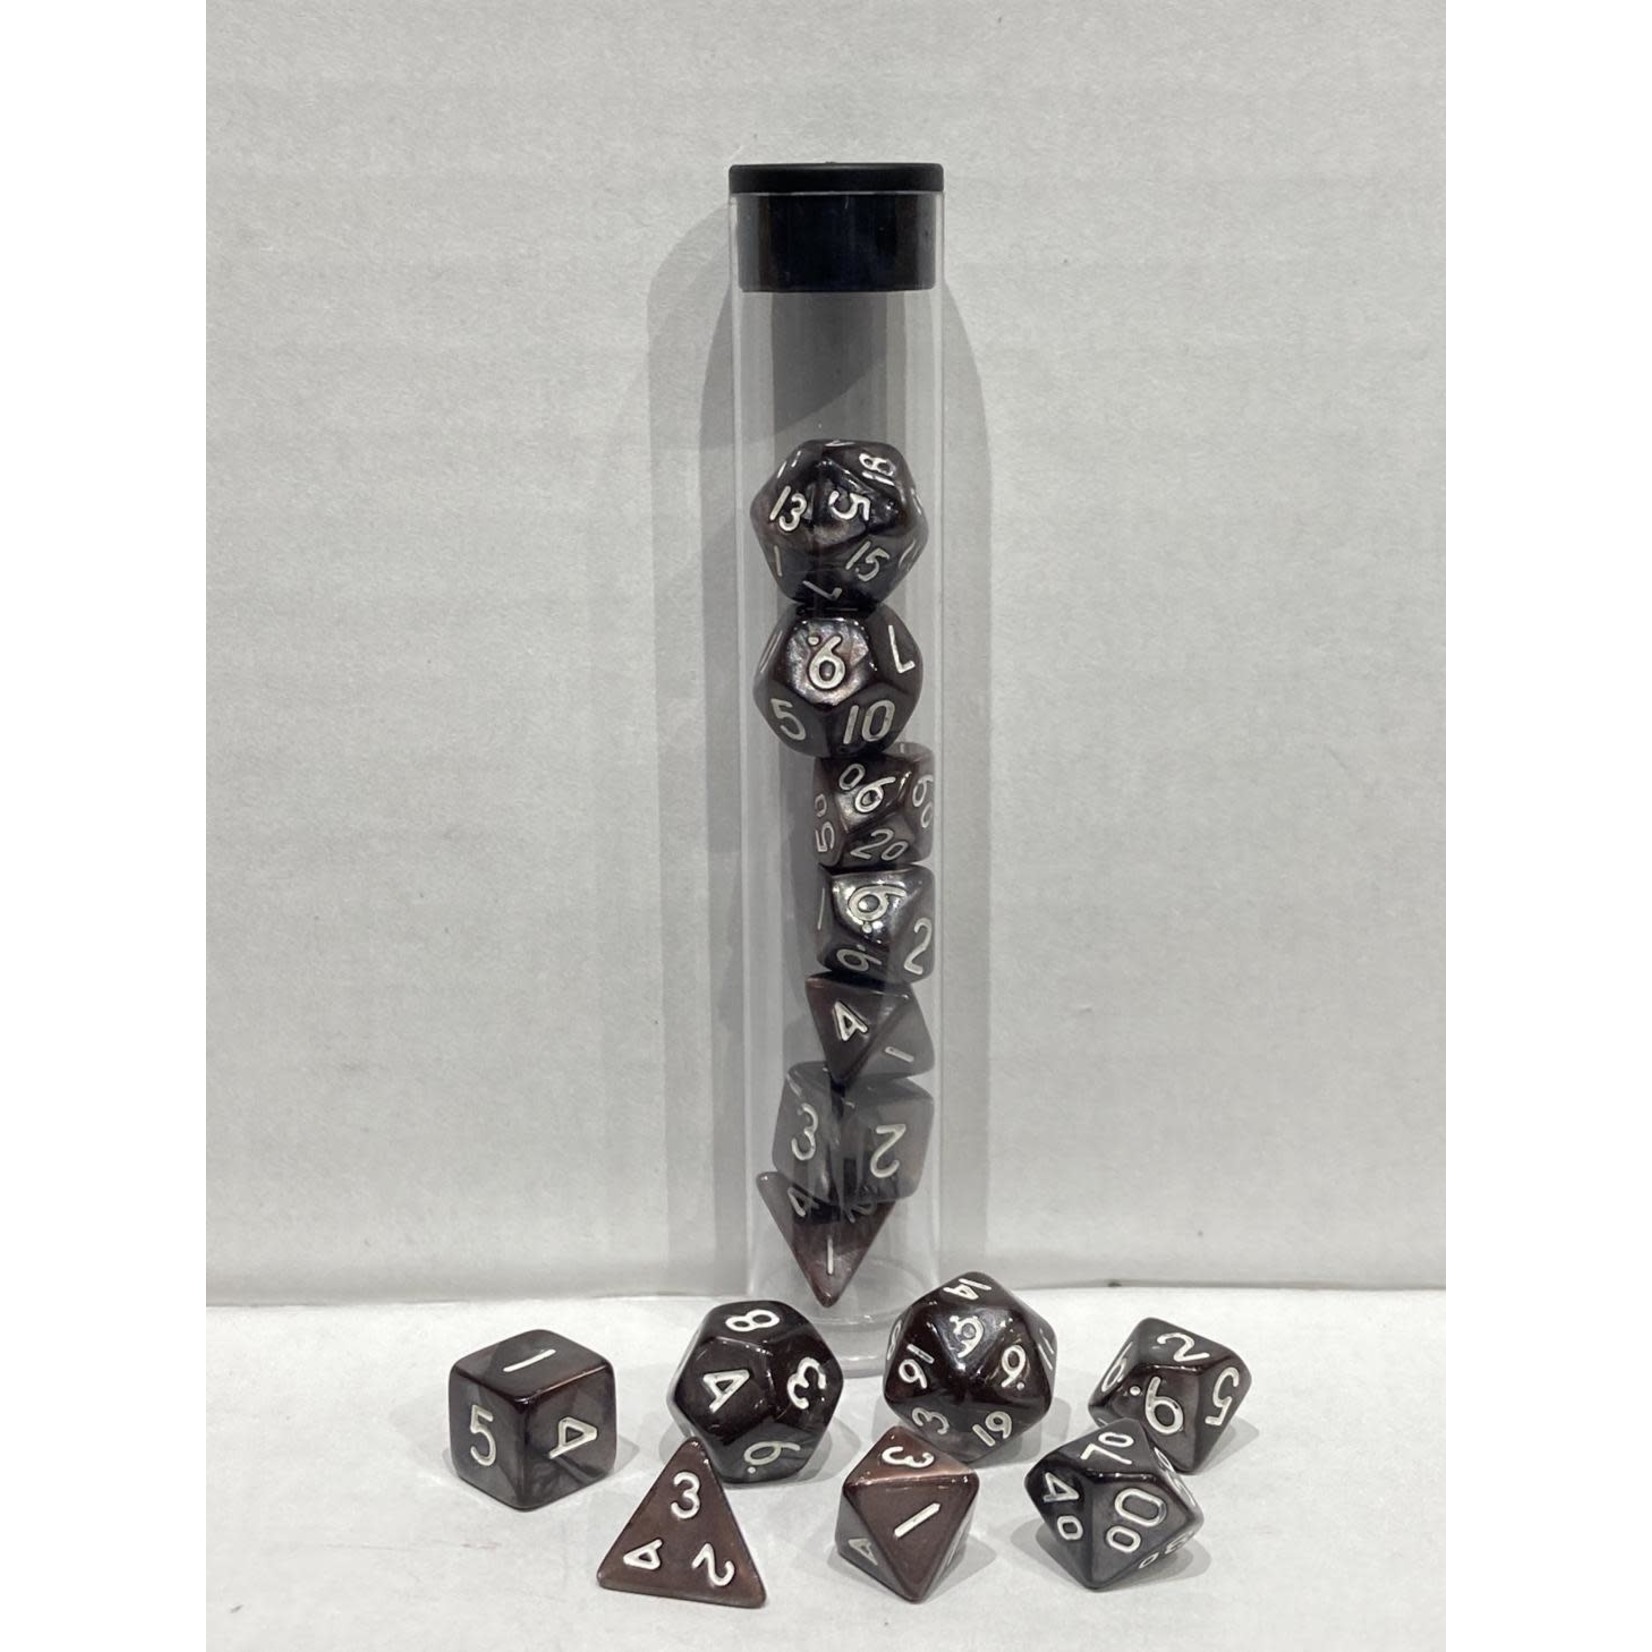 CLC Mini Polyhedral Dice - Marbled Black/Brown/Silver and White